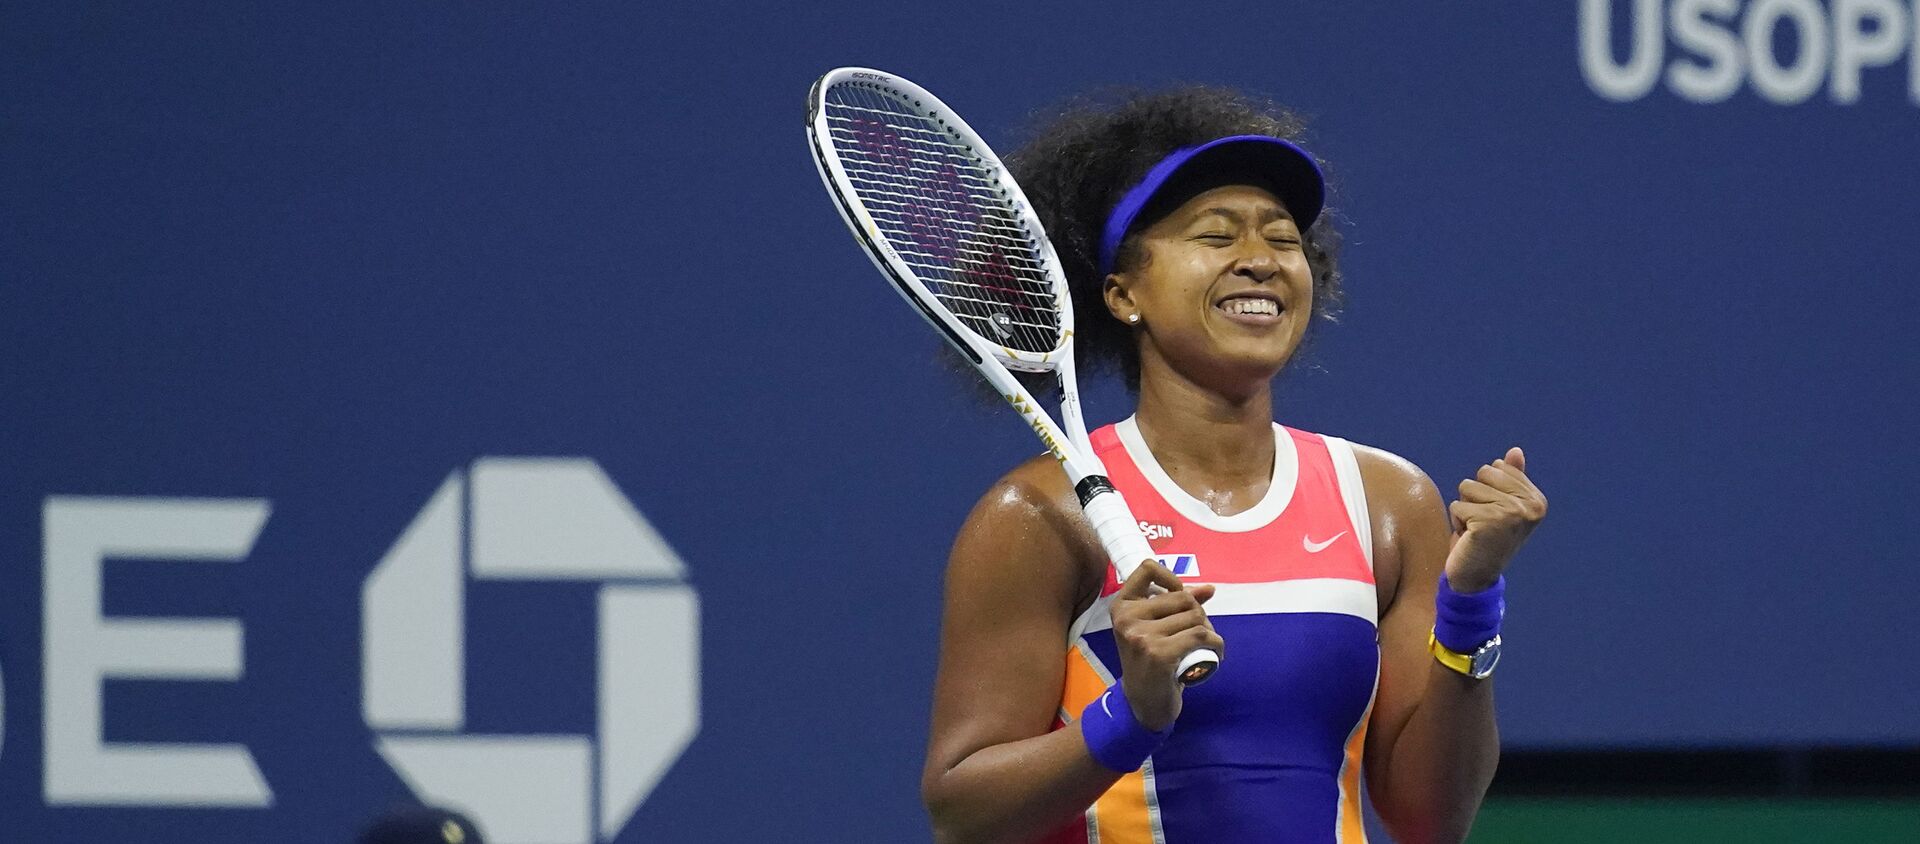 Naomi Osaka, of Japan, reacts after defeating Jennifer Brady, of the United States, during a semifinal match of the US Open tennis championships, Thursday, 10 September 2020, in New York - Sputnik International, 1920, 31.05.2021